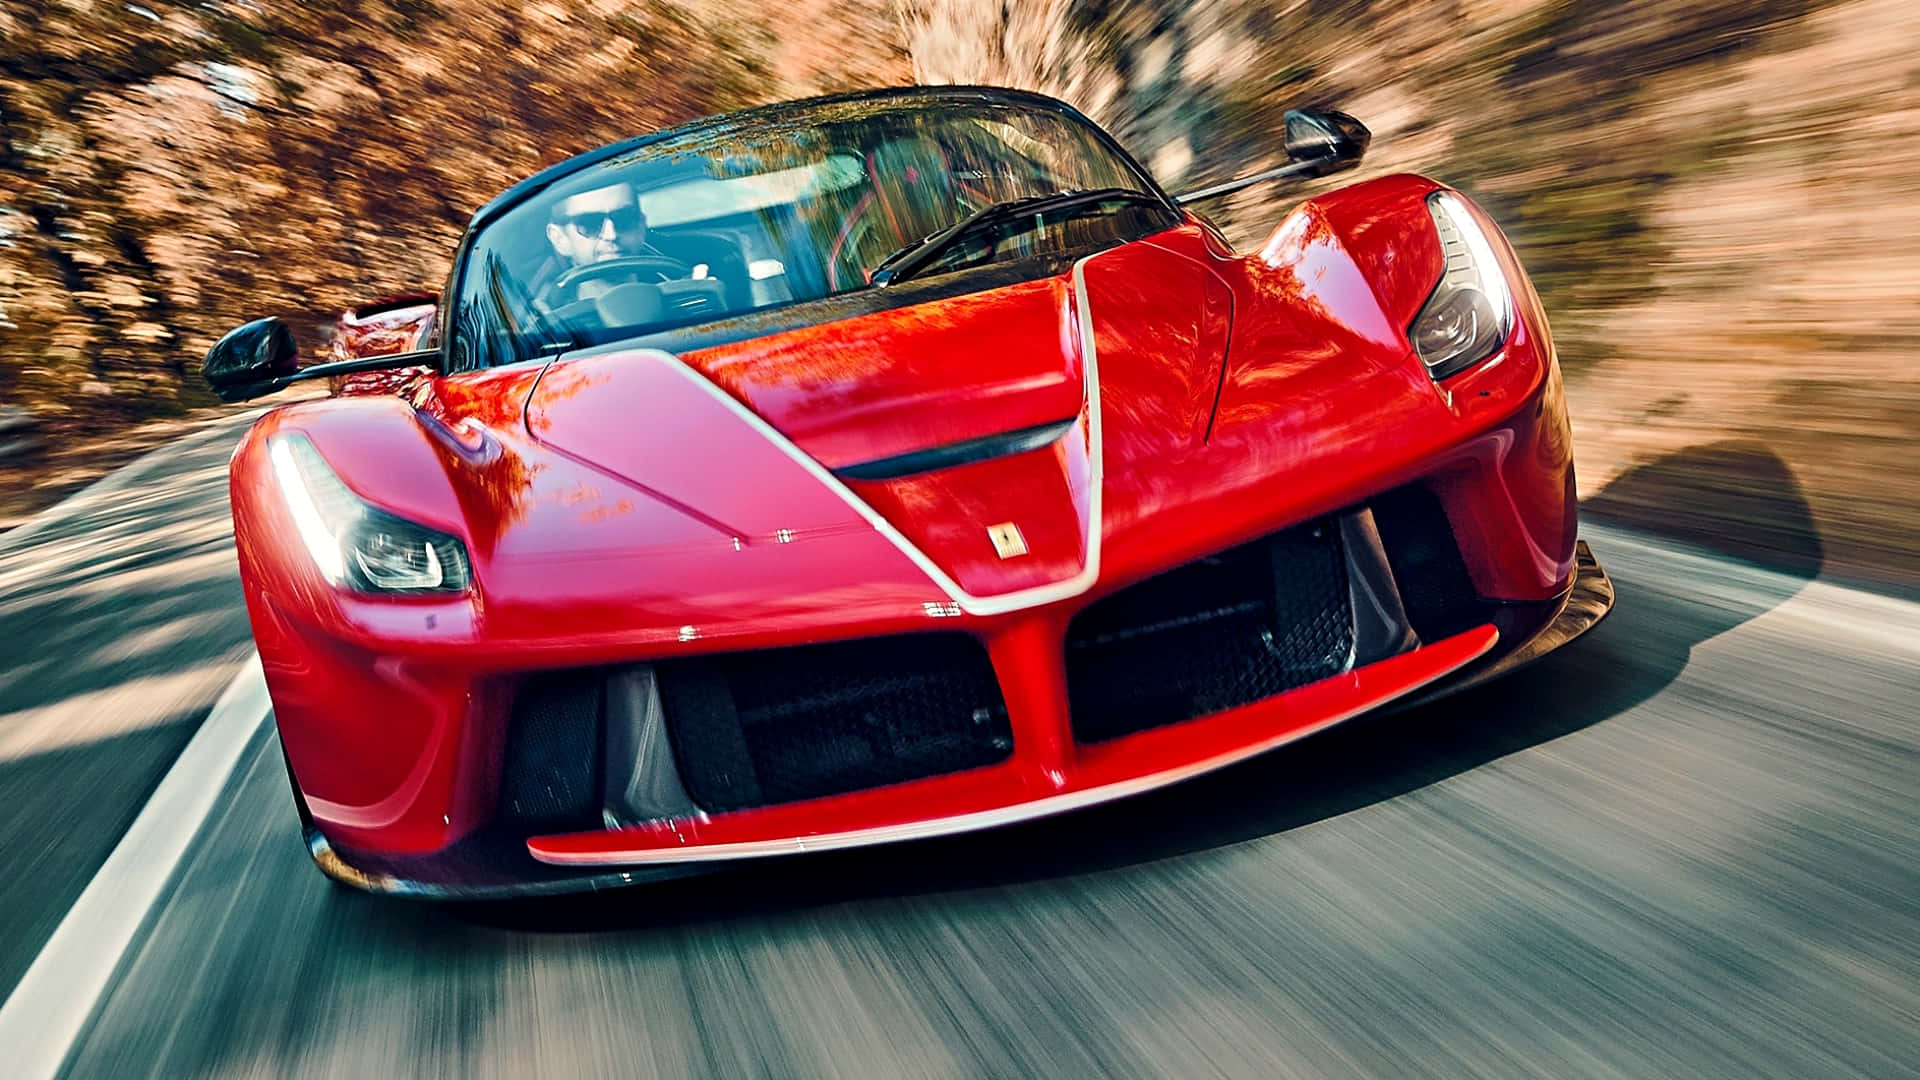 "Awe-inspiring Picture of a Red Ferrari Unleashing Power on the Road"